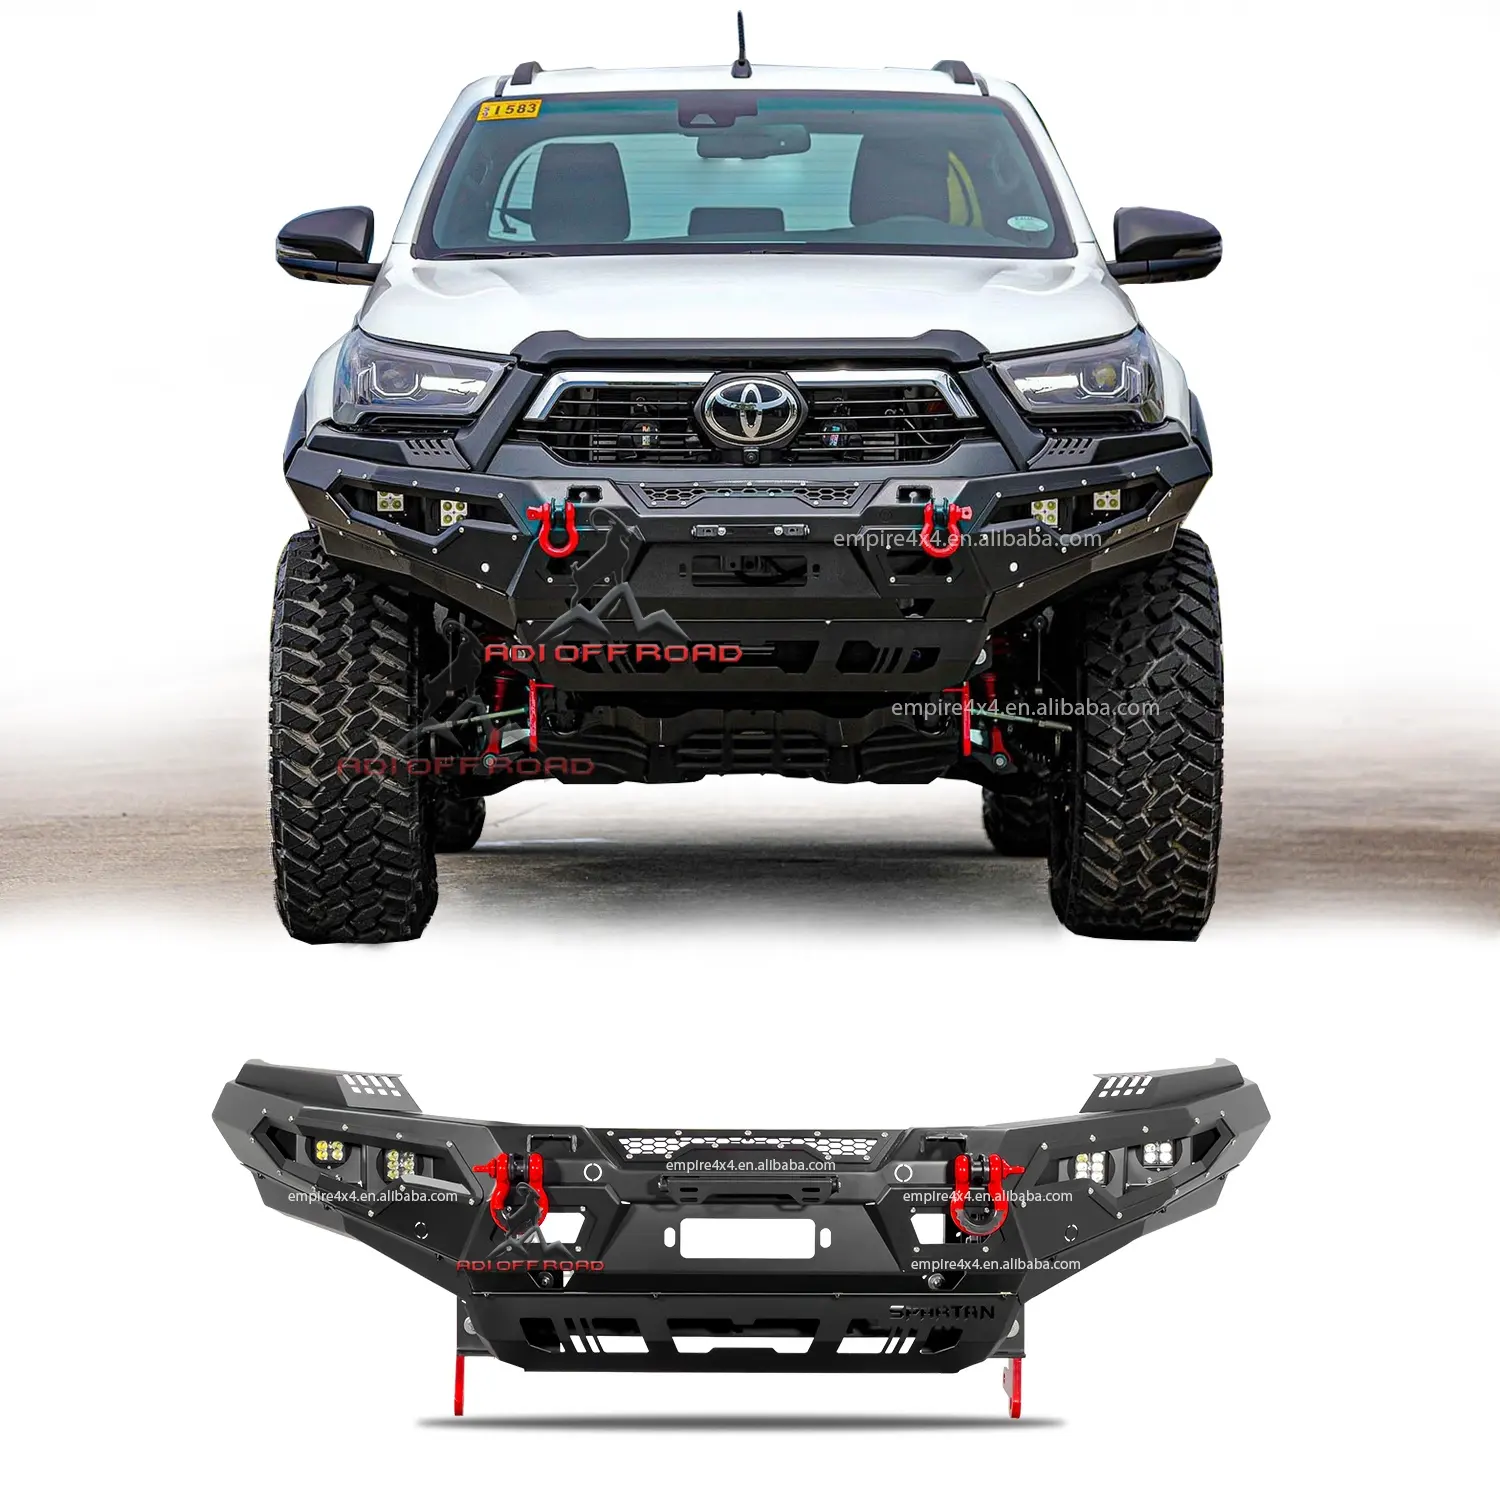 ADI F16 series BULL BAR Steel front bumpers rear bumpers for -toyota hilux revo rogue Conquest 2021 2022 2023